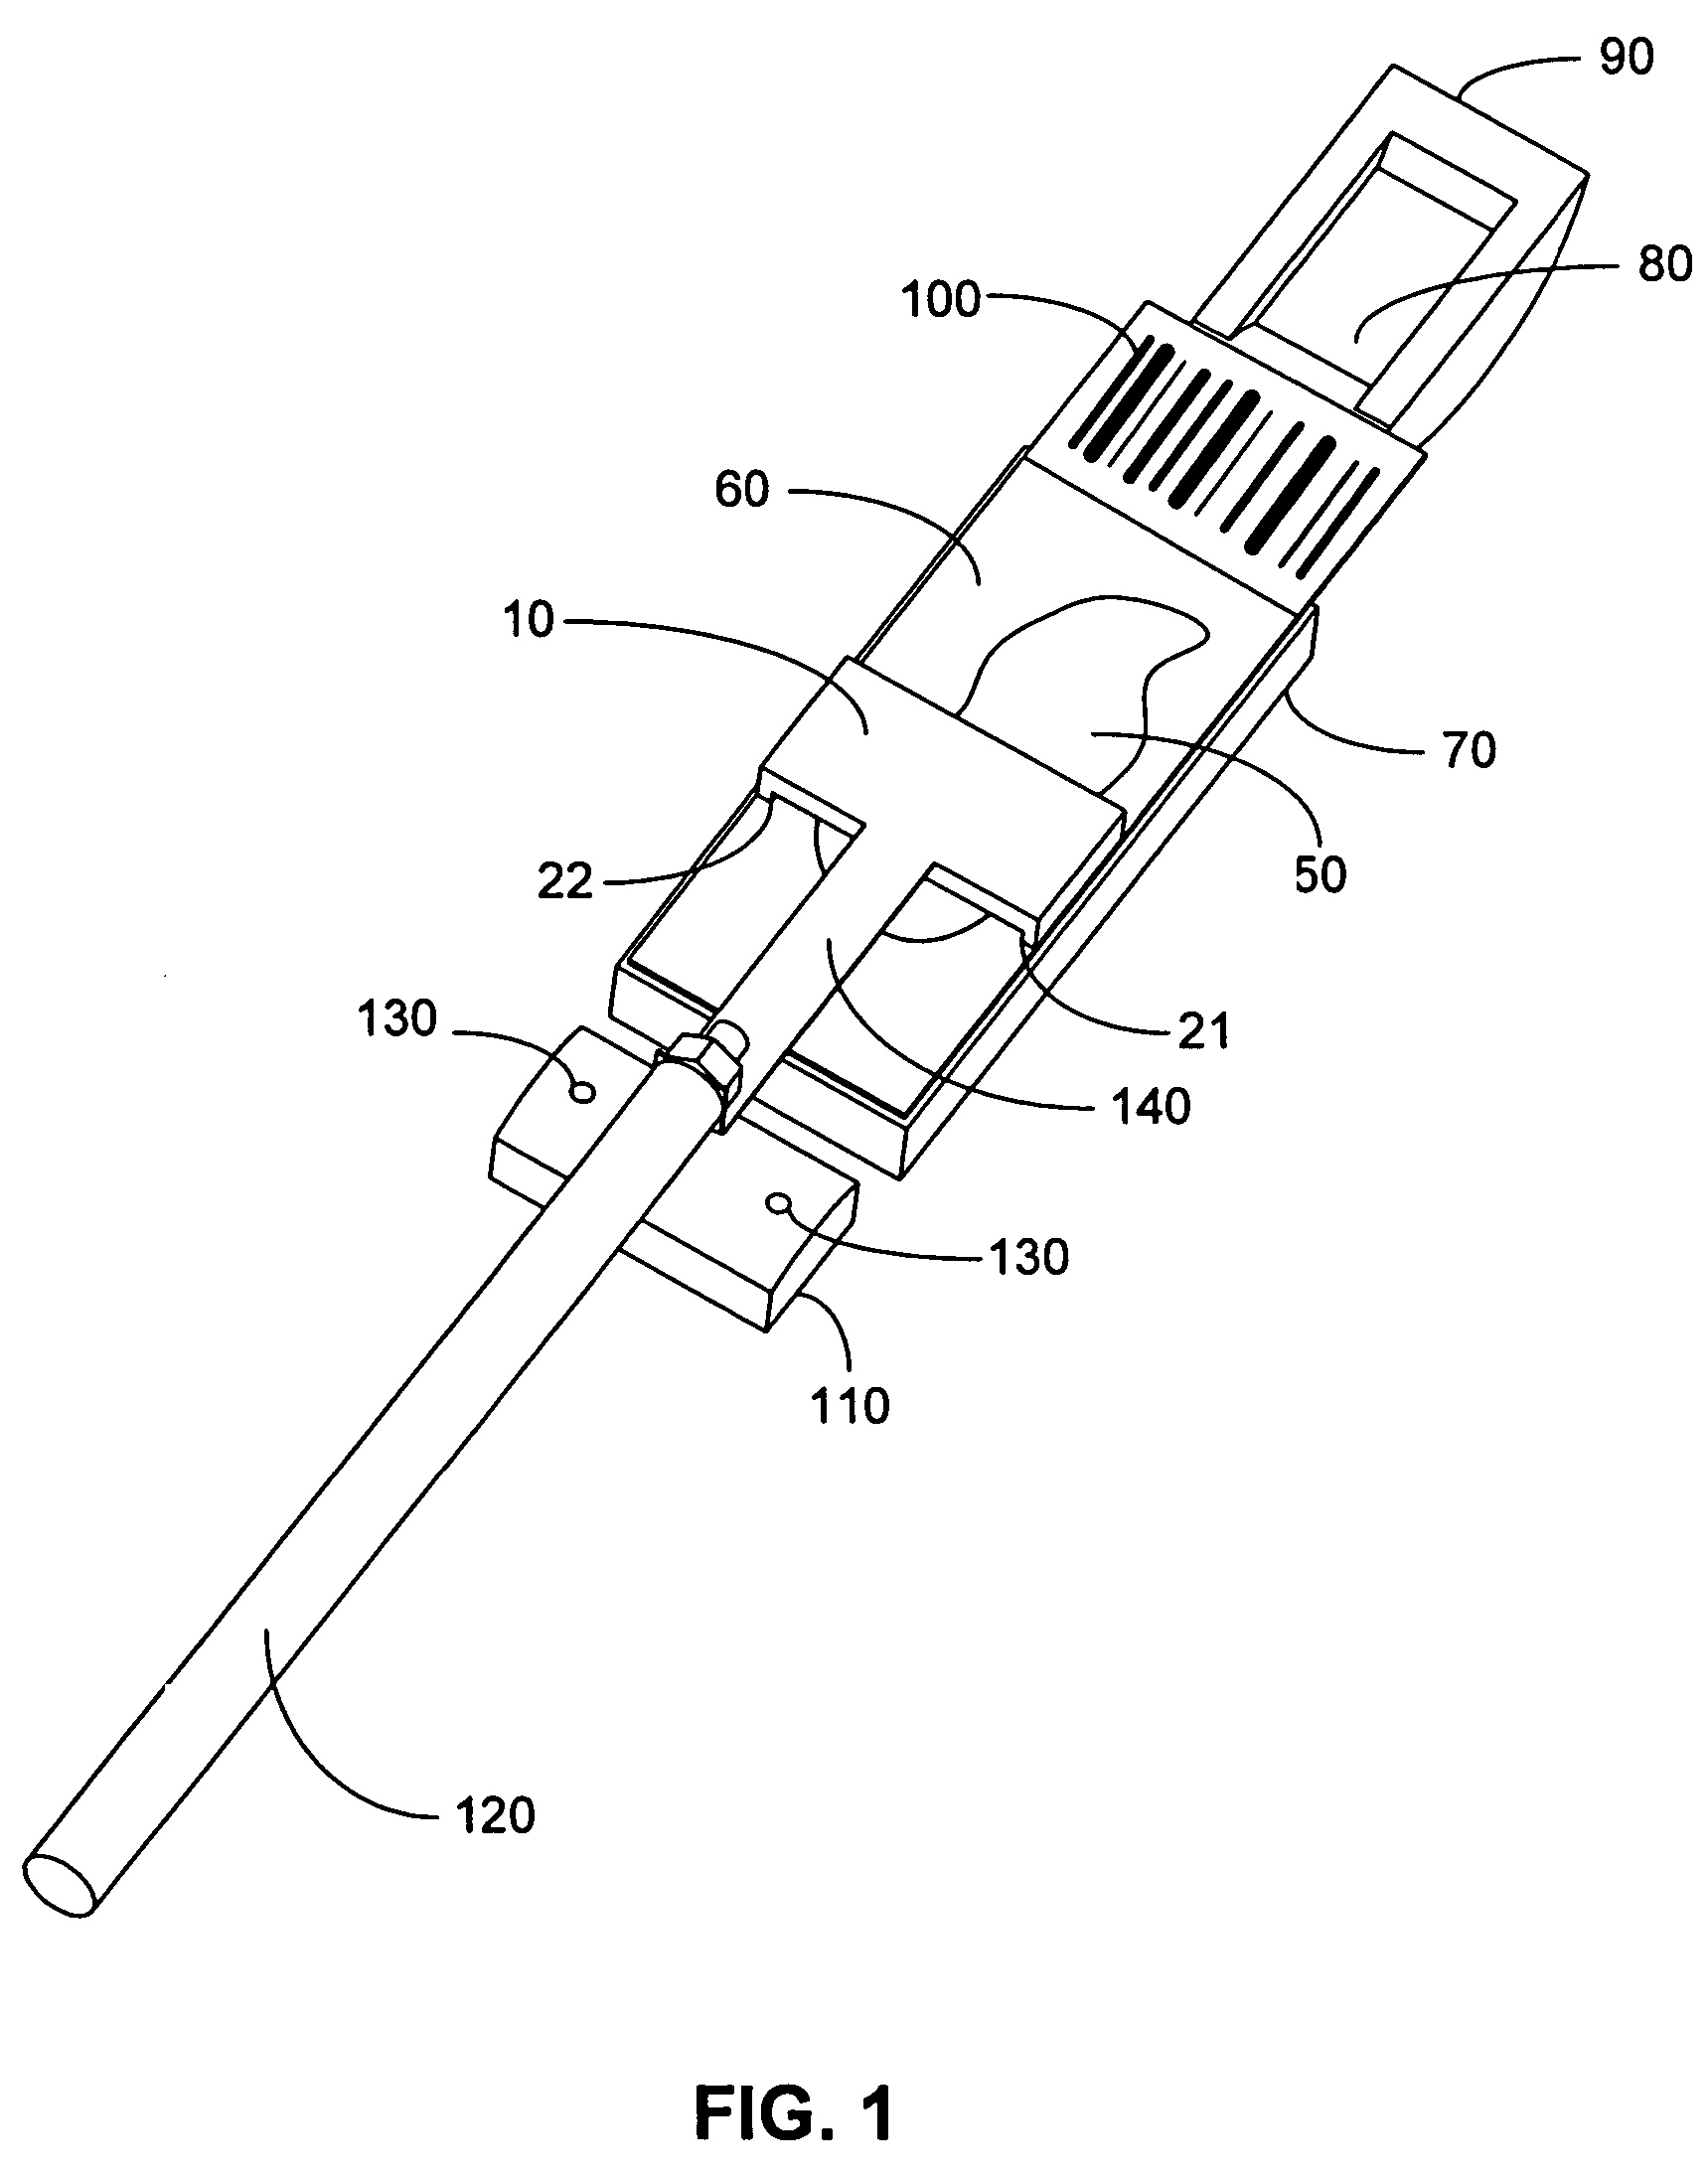 Method and apparatus for applying fluids to a biological sample